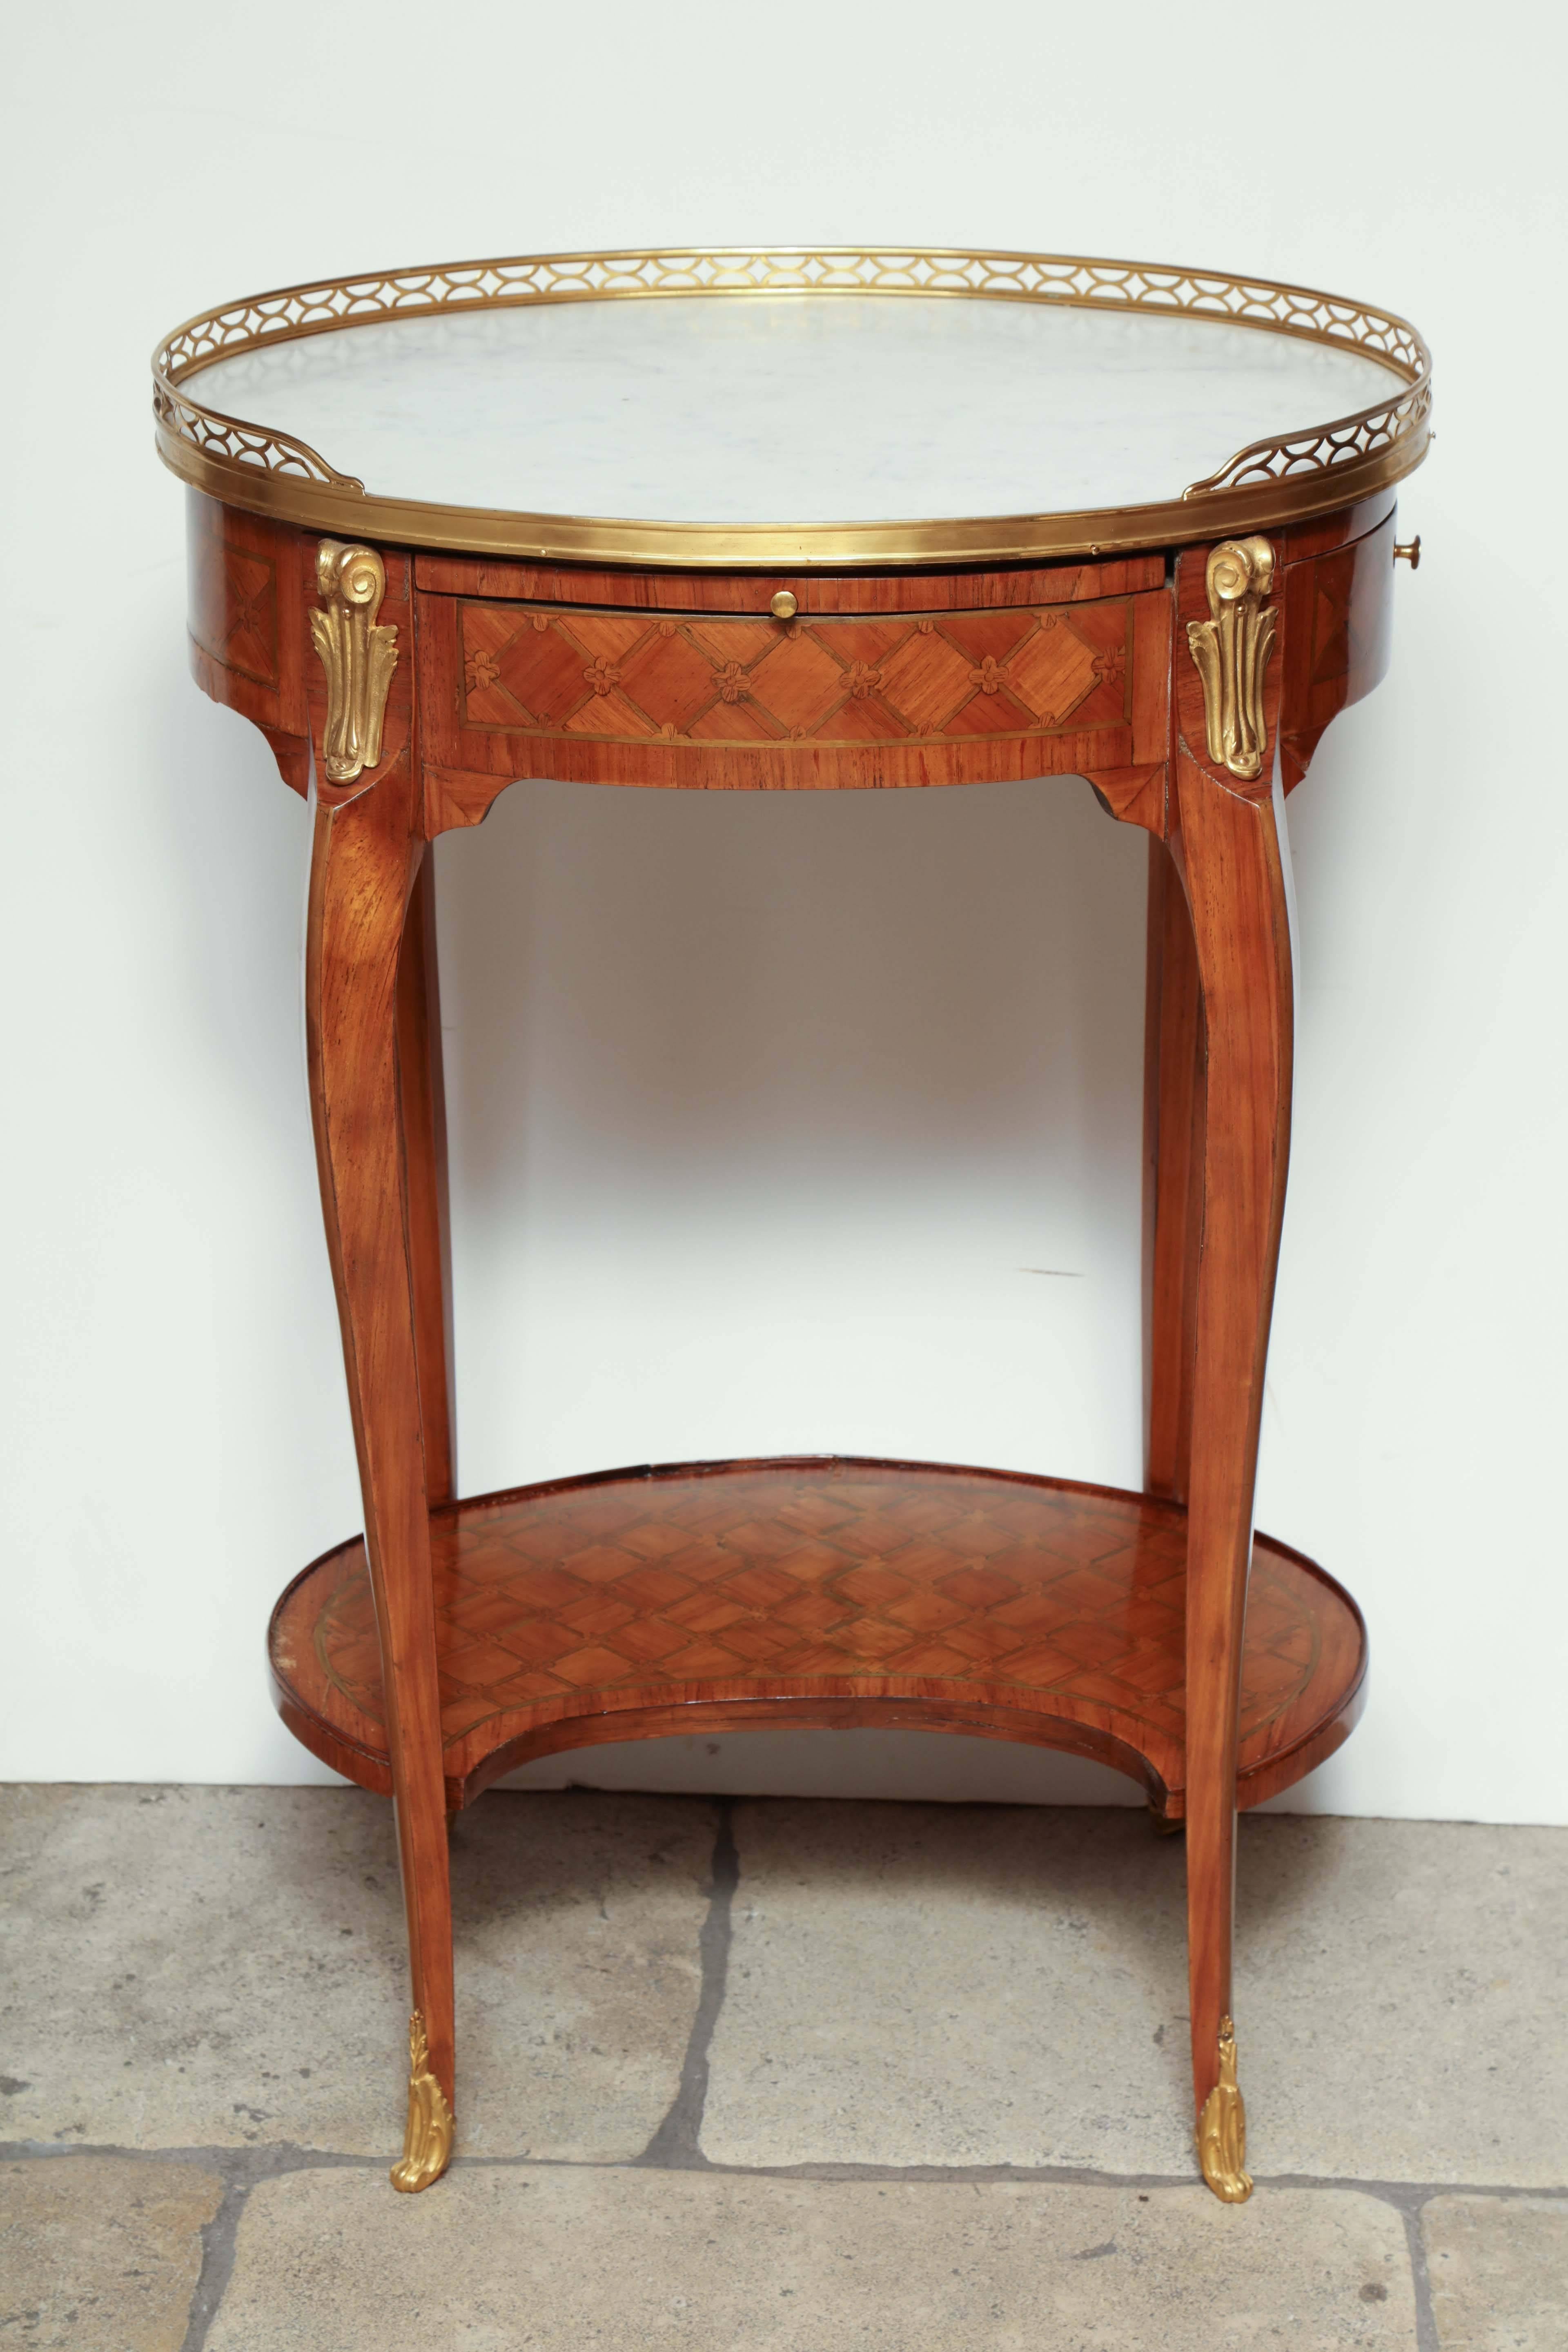 19th Century Pair of French Marble-Top Side Tables